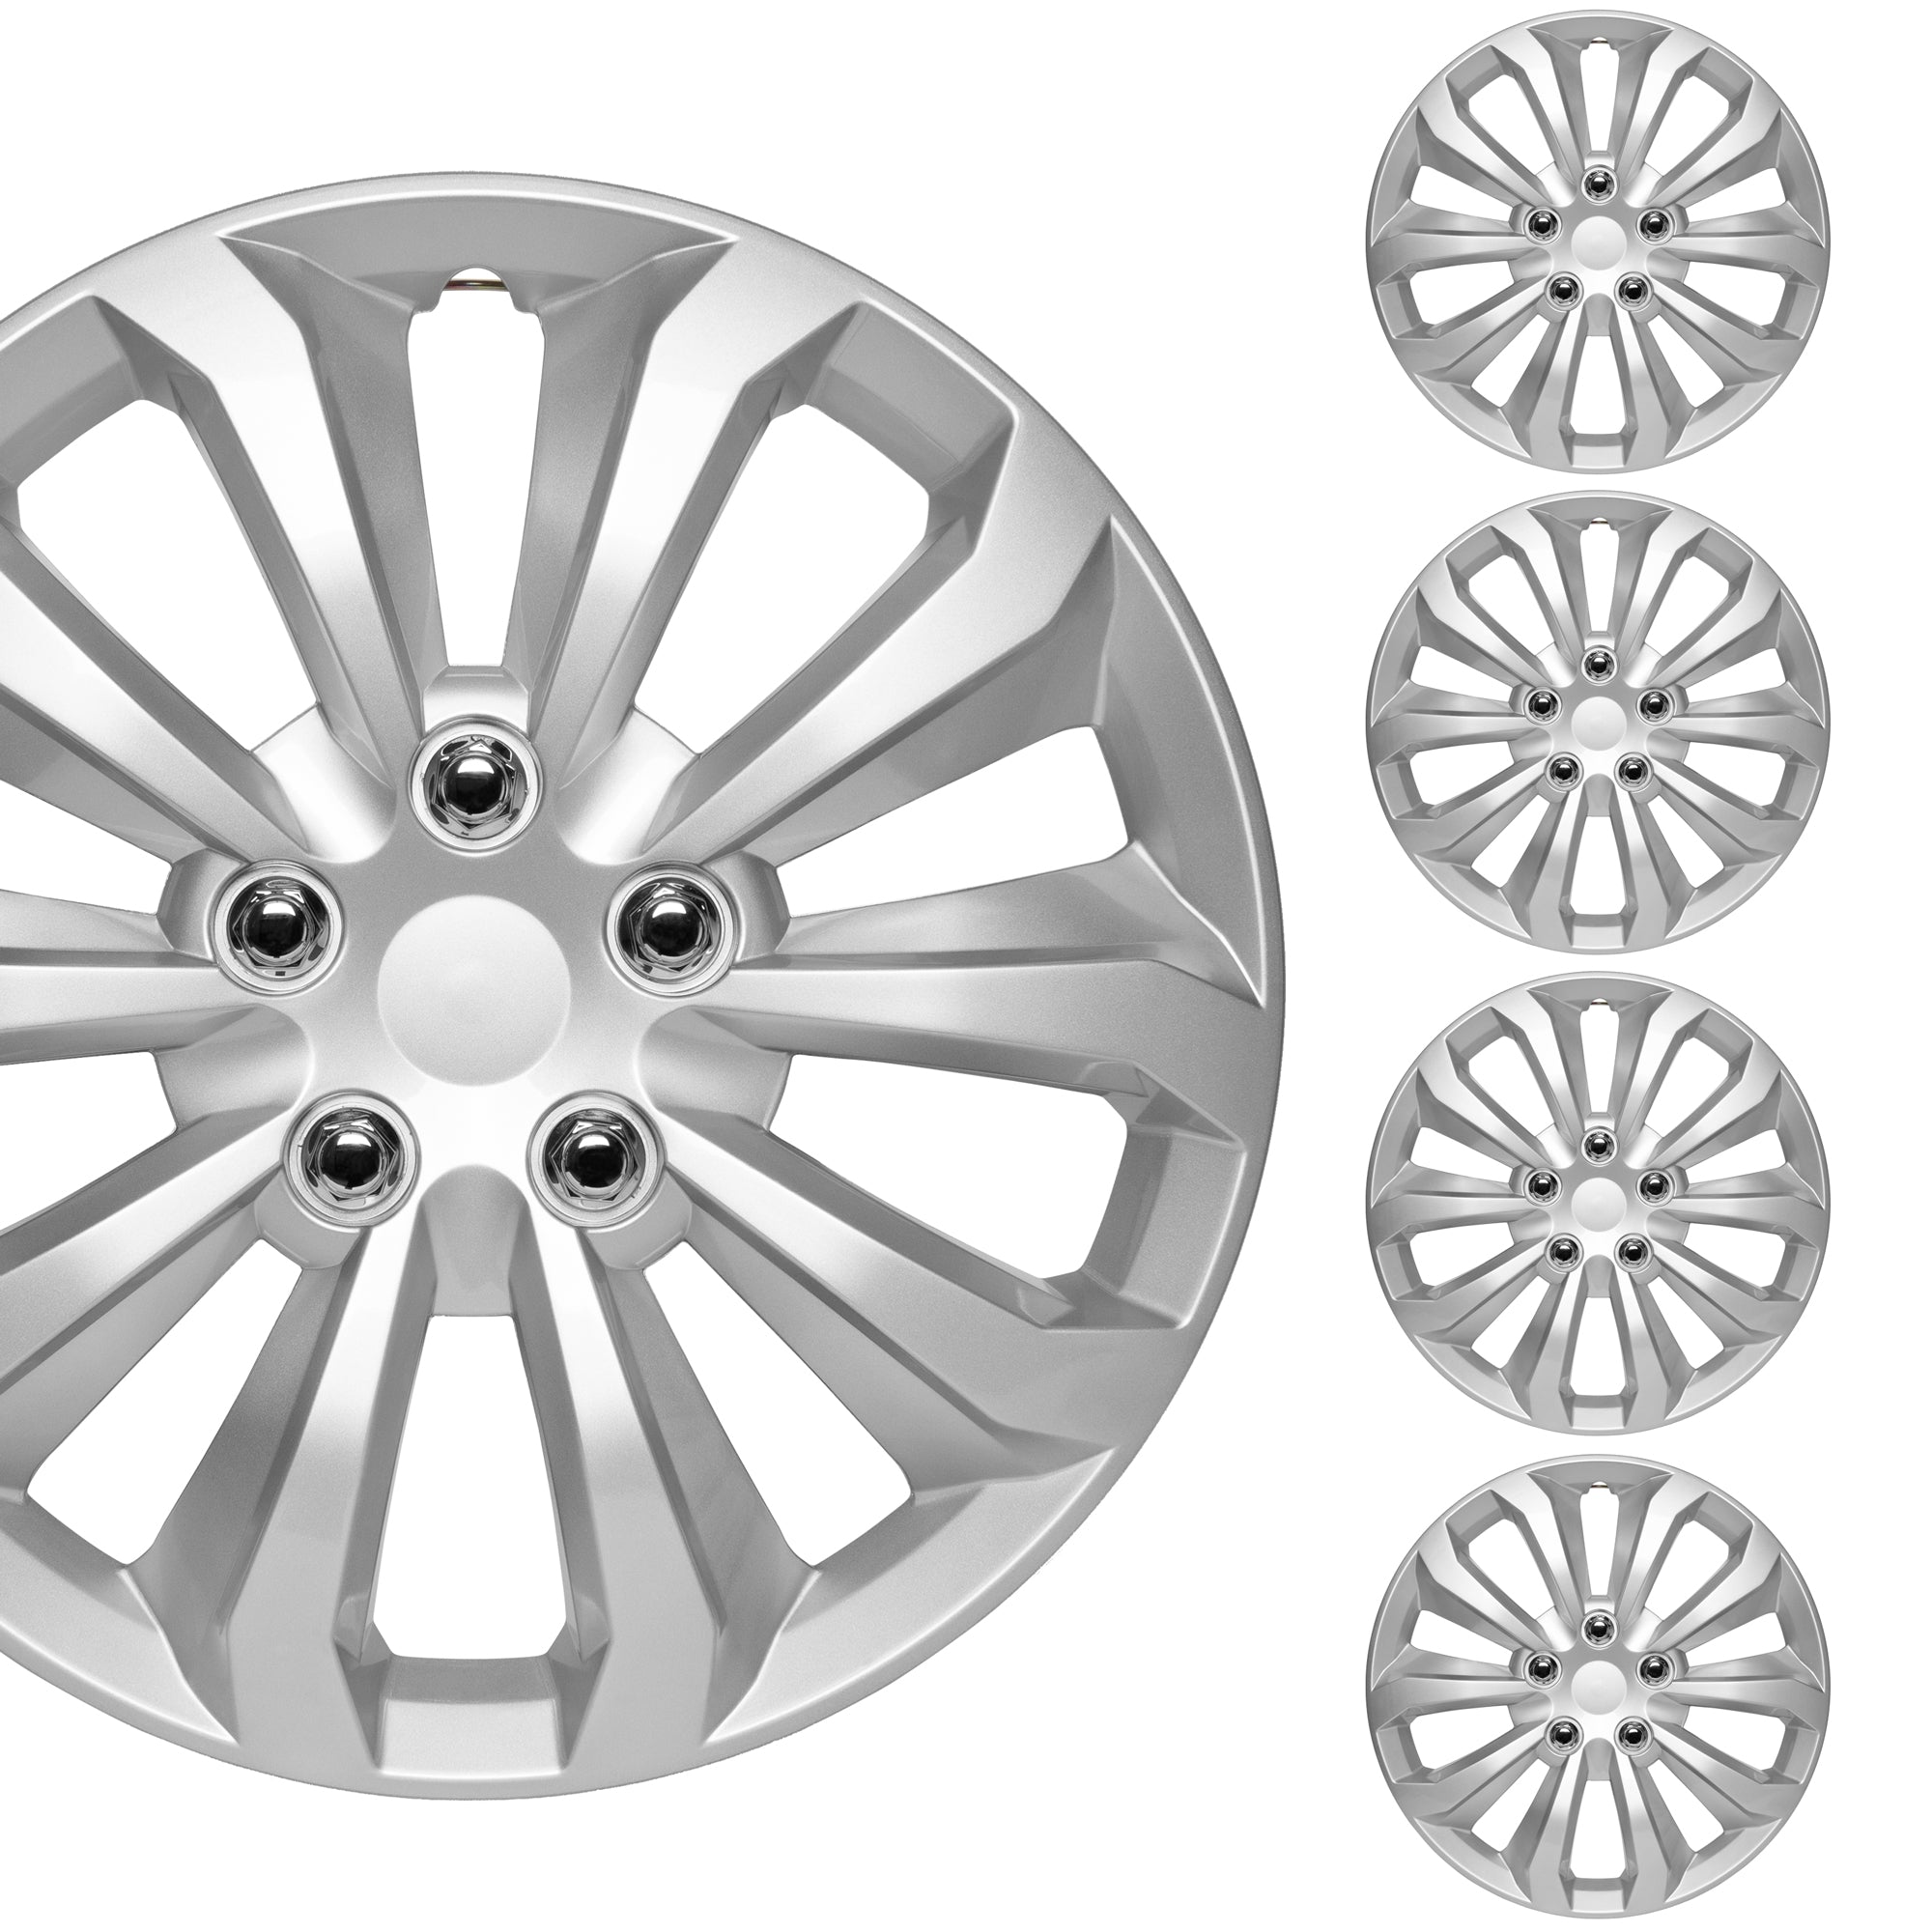 BDK Hubcaps Wheel Covers for Cars Premium Silver Hubcaps 16" Wheel Rim Cover Replacement Snap On Hubcaps for Toyota Camry Corolla Style Automotive (4-Pack)